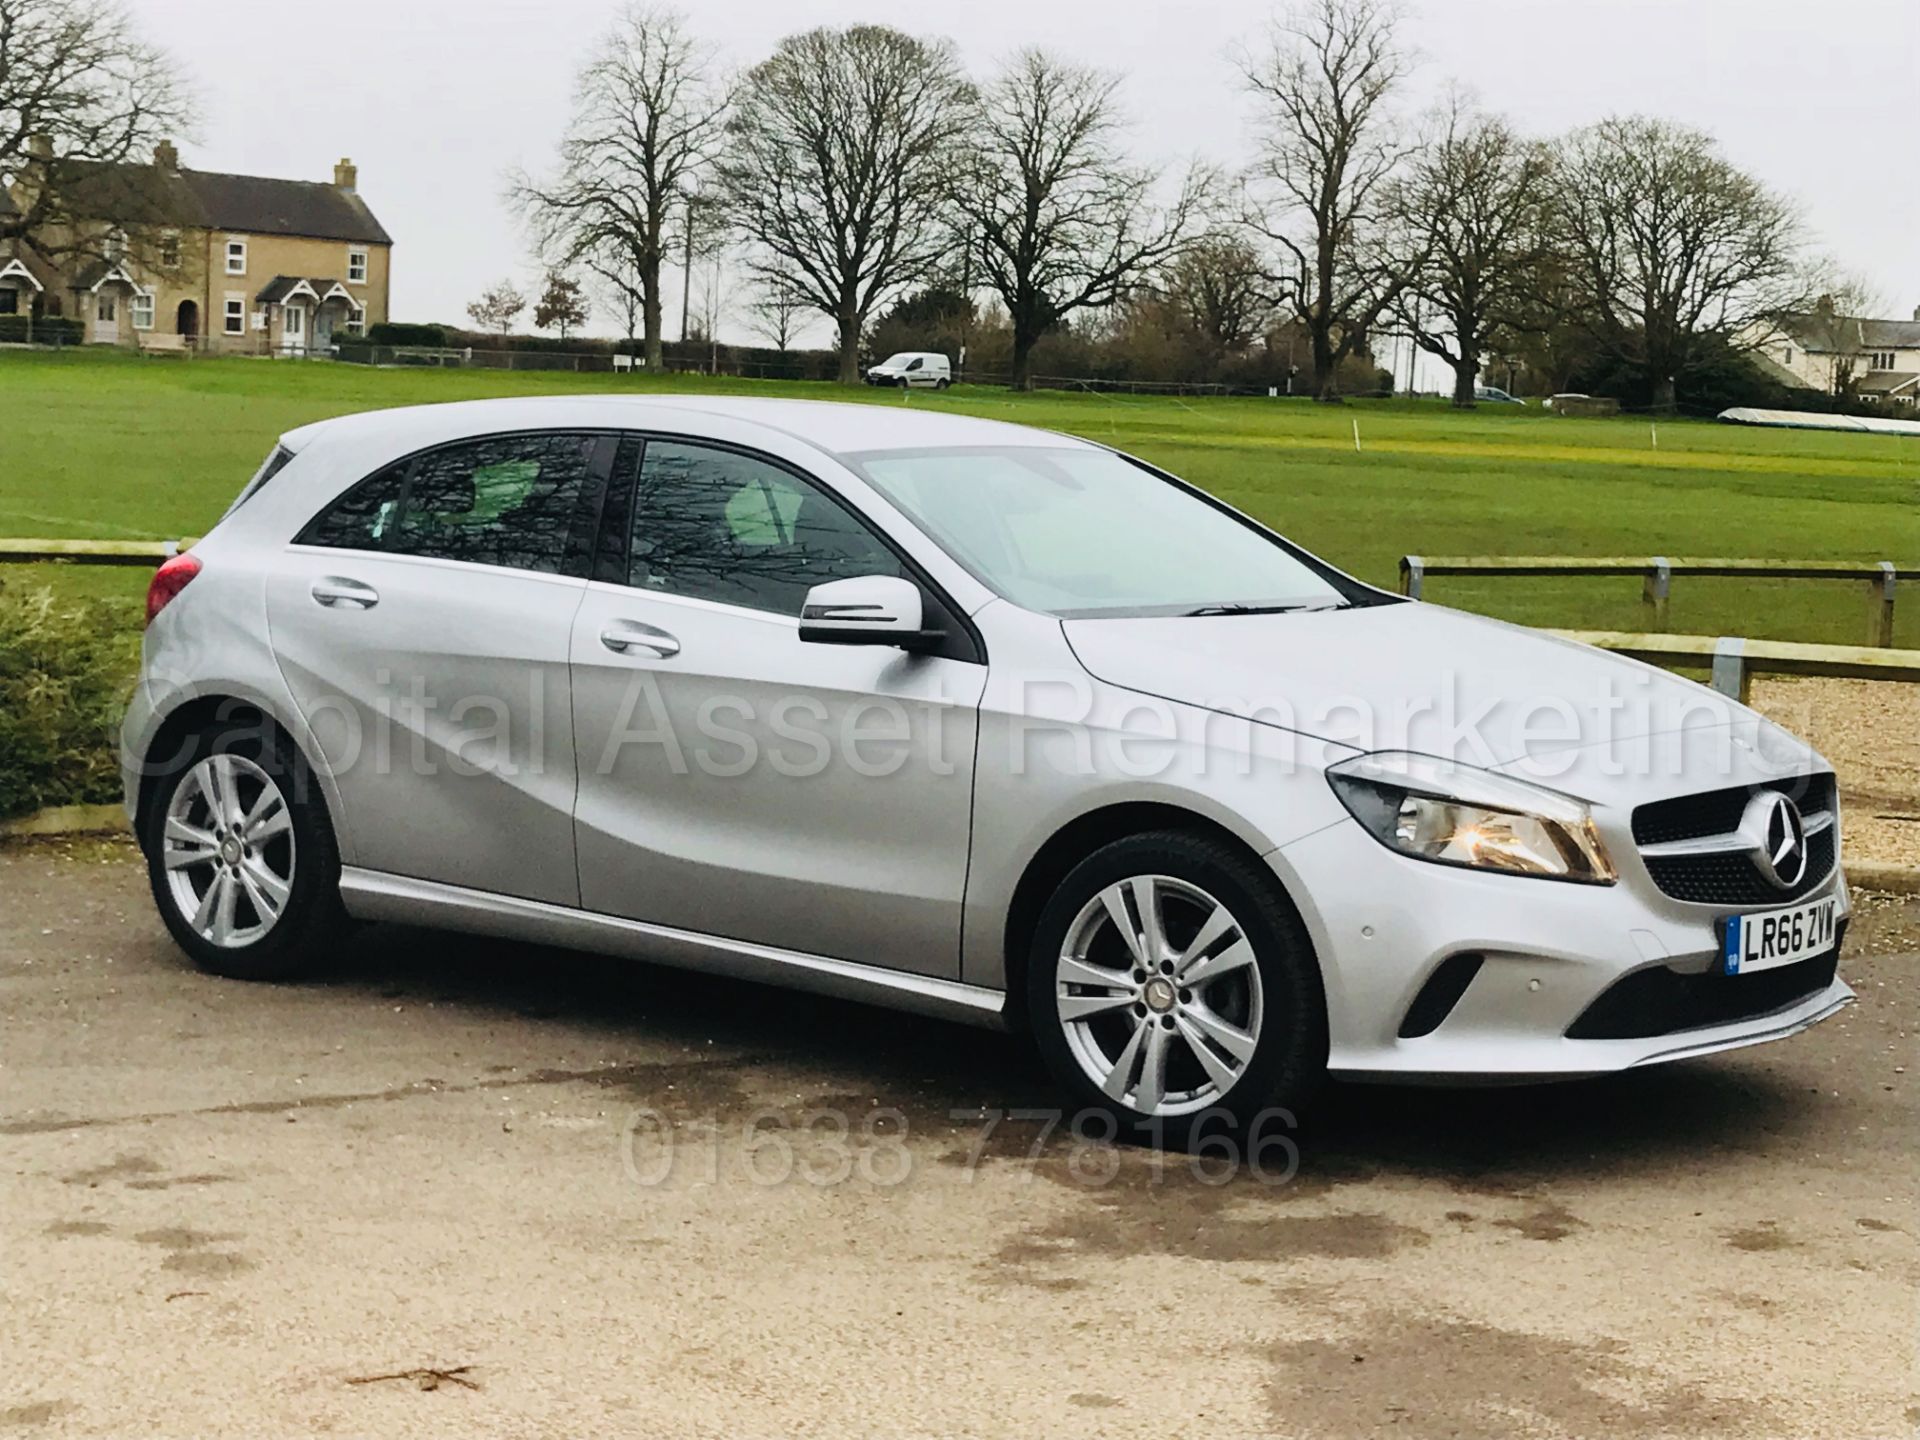 MERCEDES-BENZ A180D 'SPORT' (2017 MODEL) '7G TRONIC AUTO - LEATHER - SAT NAV' (1 OWNER FROM NEW) - Image 2 of 41